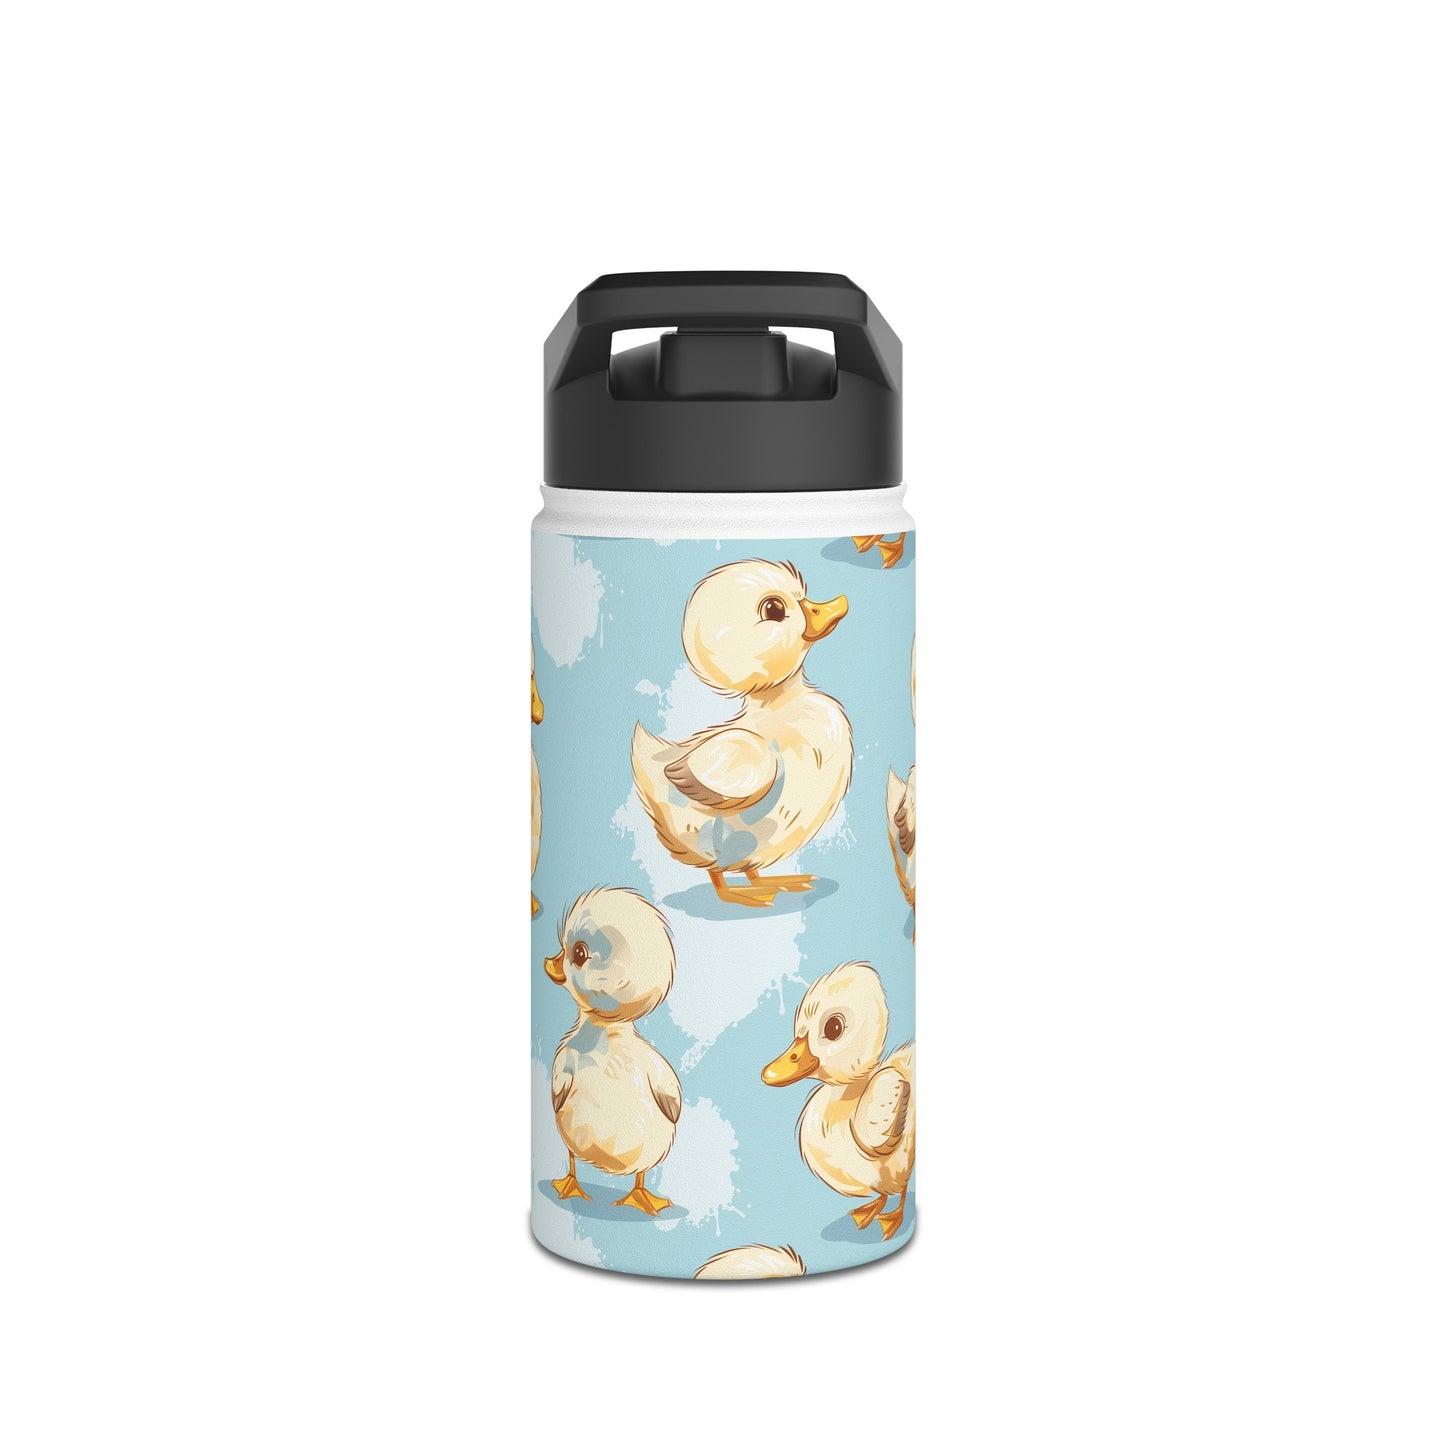 Insulated Water Bottle, 12oz, Cute Baby Ducklings - Double Walled Stainless Steel Thermos, Keeps Drinks Hot or Cold